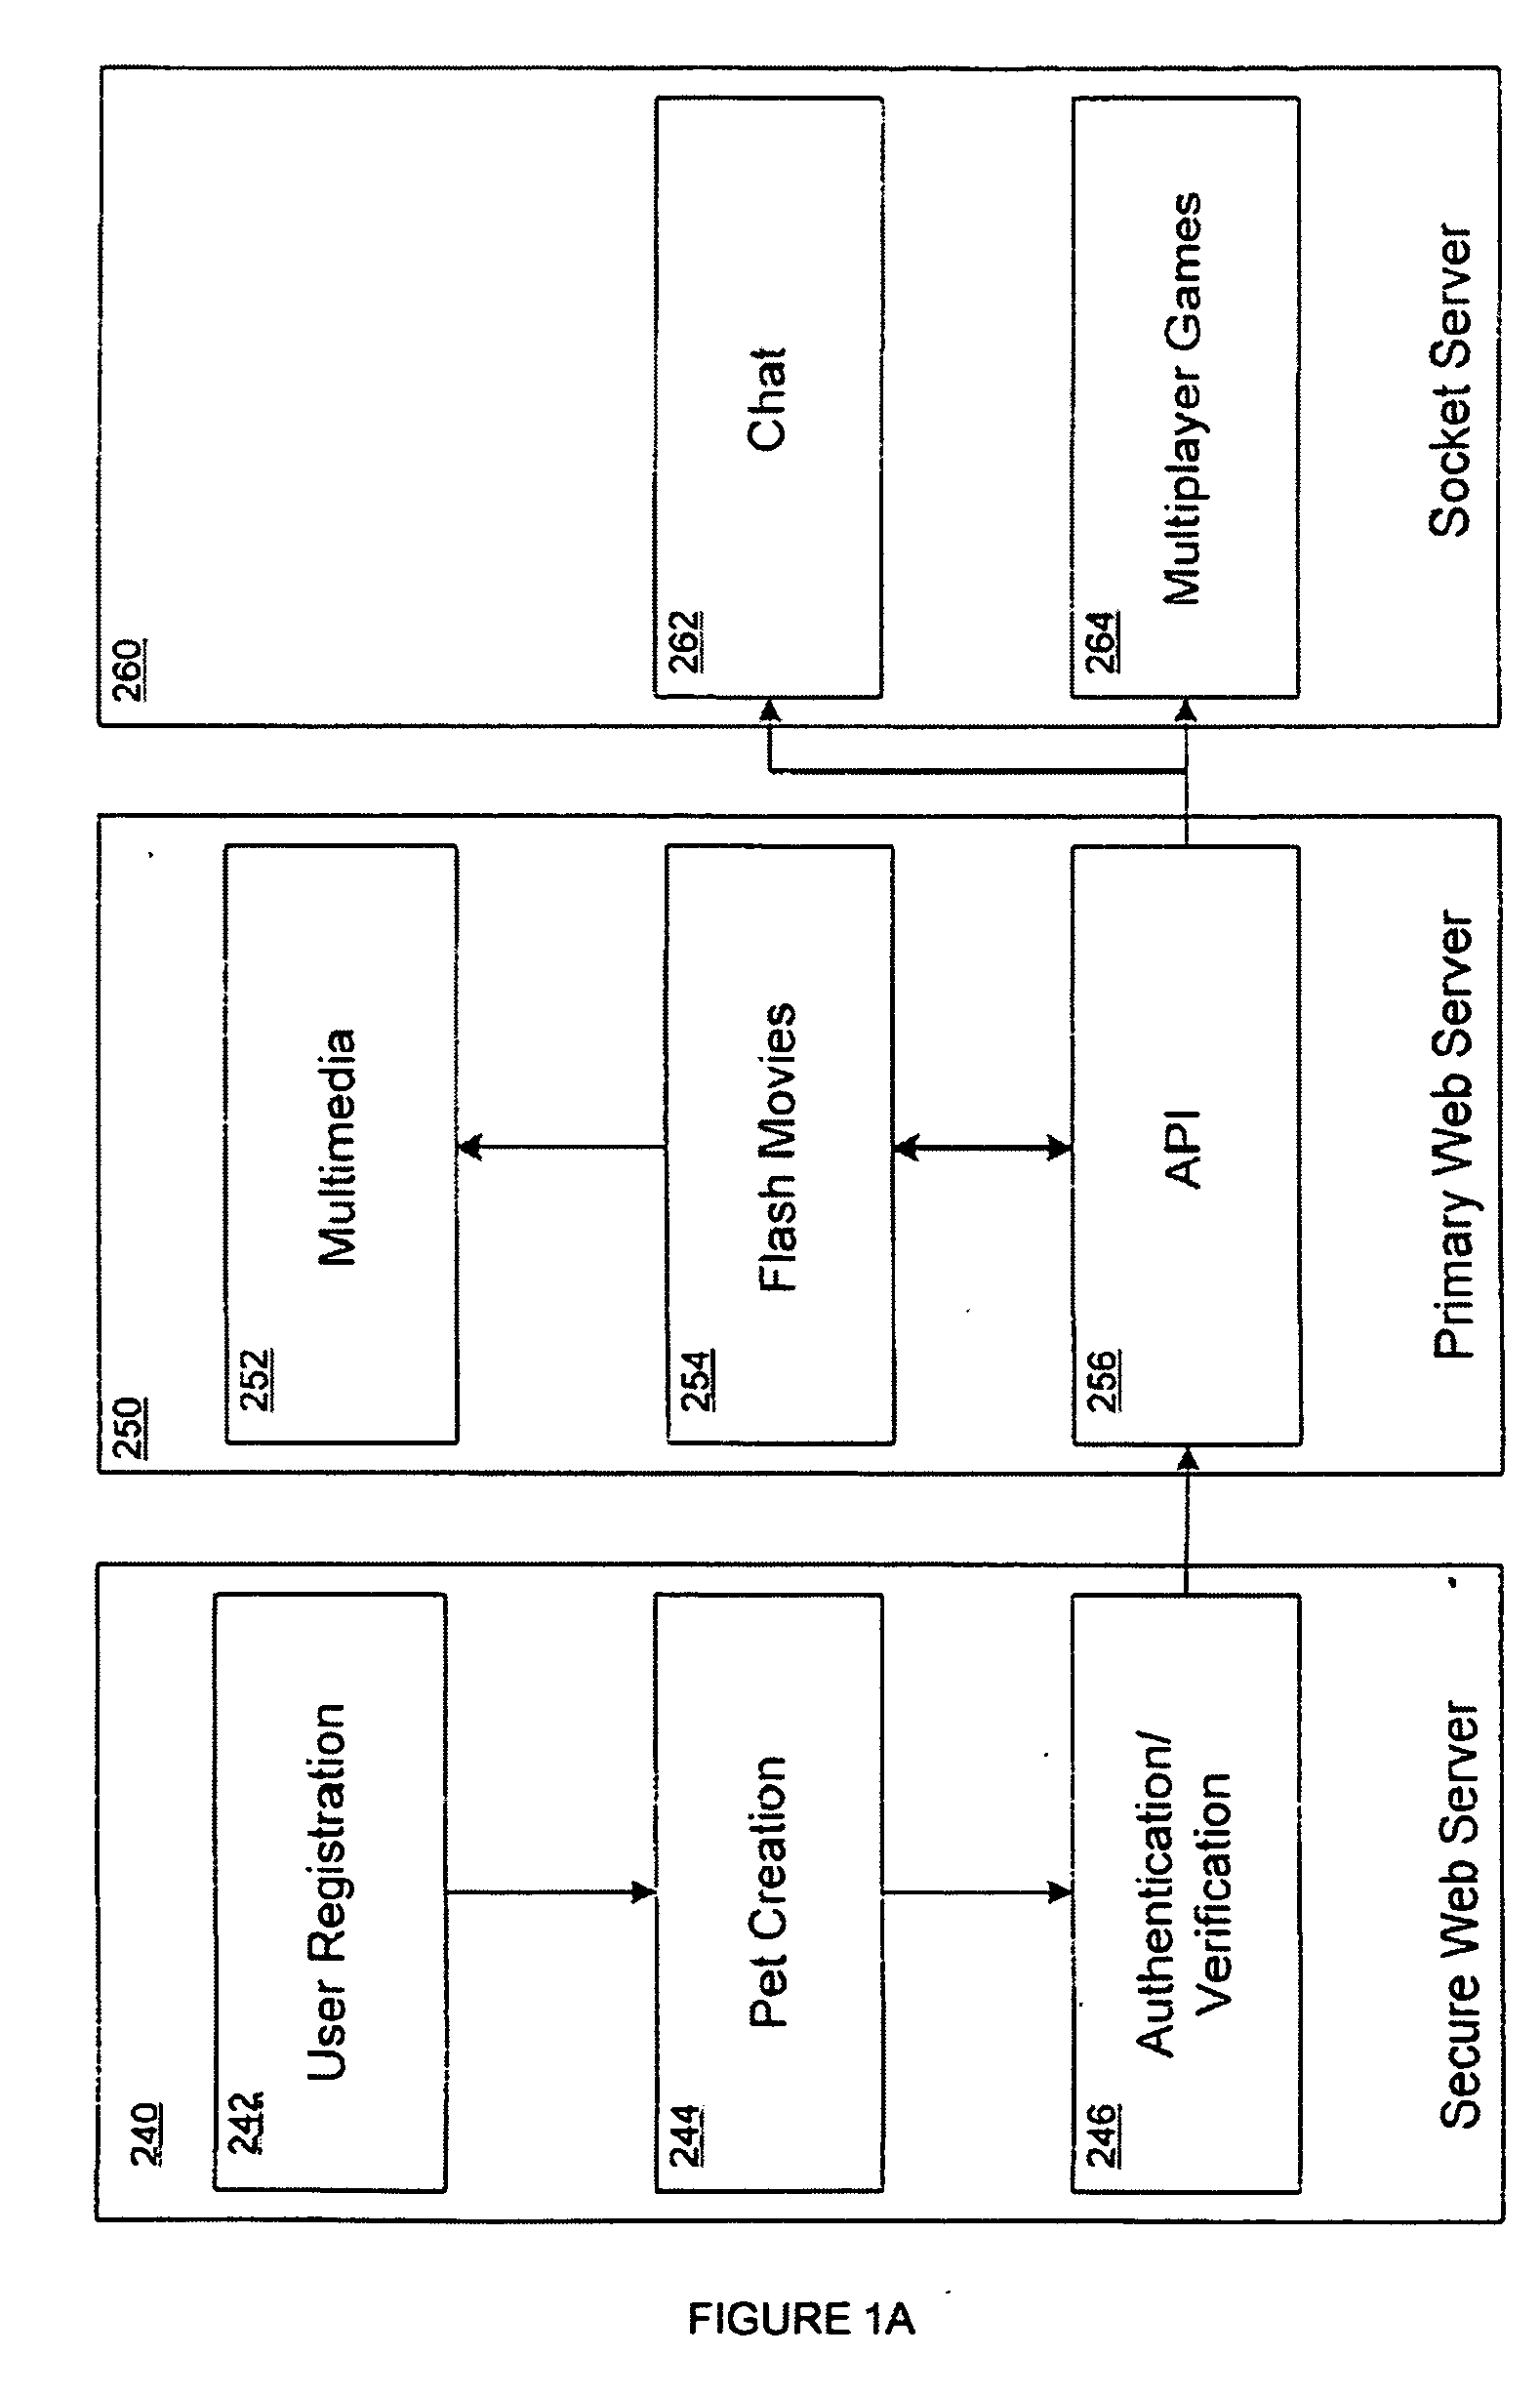 System and method for product marketing using feature codes